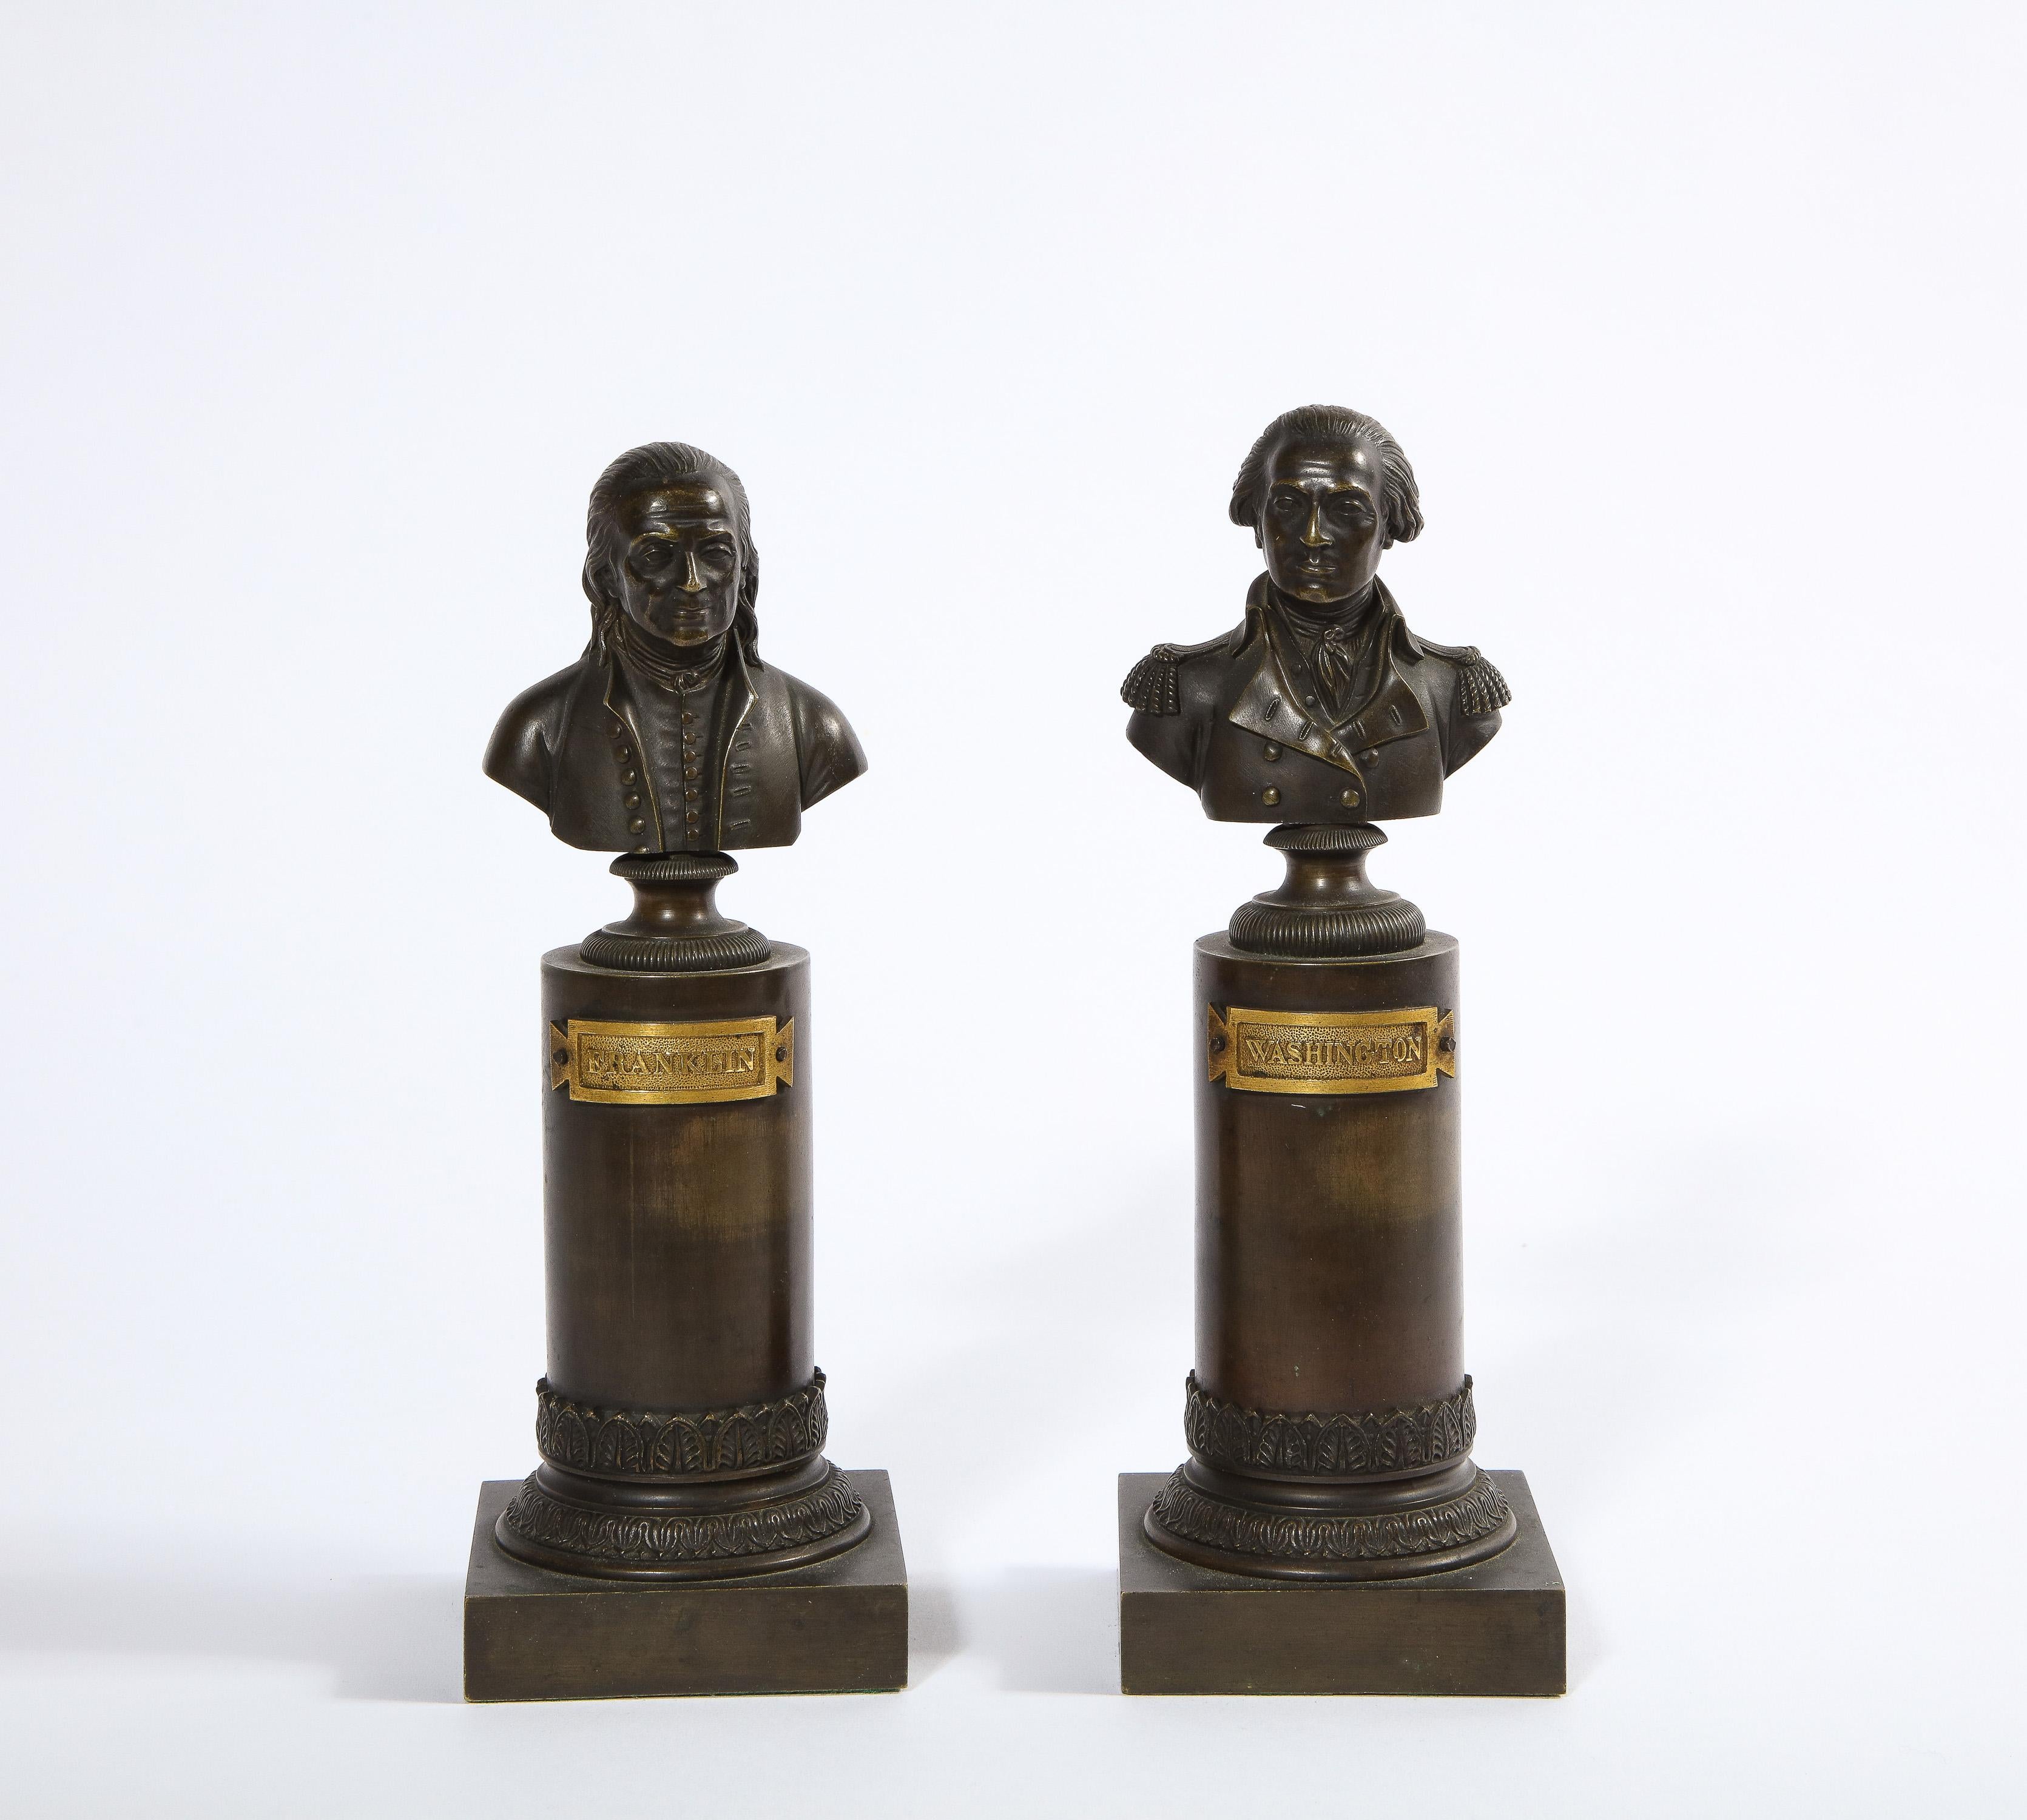 A rare pair of American bronze busts of George Washington and Benjamin Franklin, circa 1820.

Both realistically modelled, one titled Washington and the other Franklin. Fantastic quality, these are true collectors pieces.

Excellent condition,